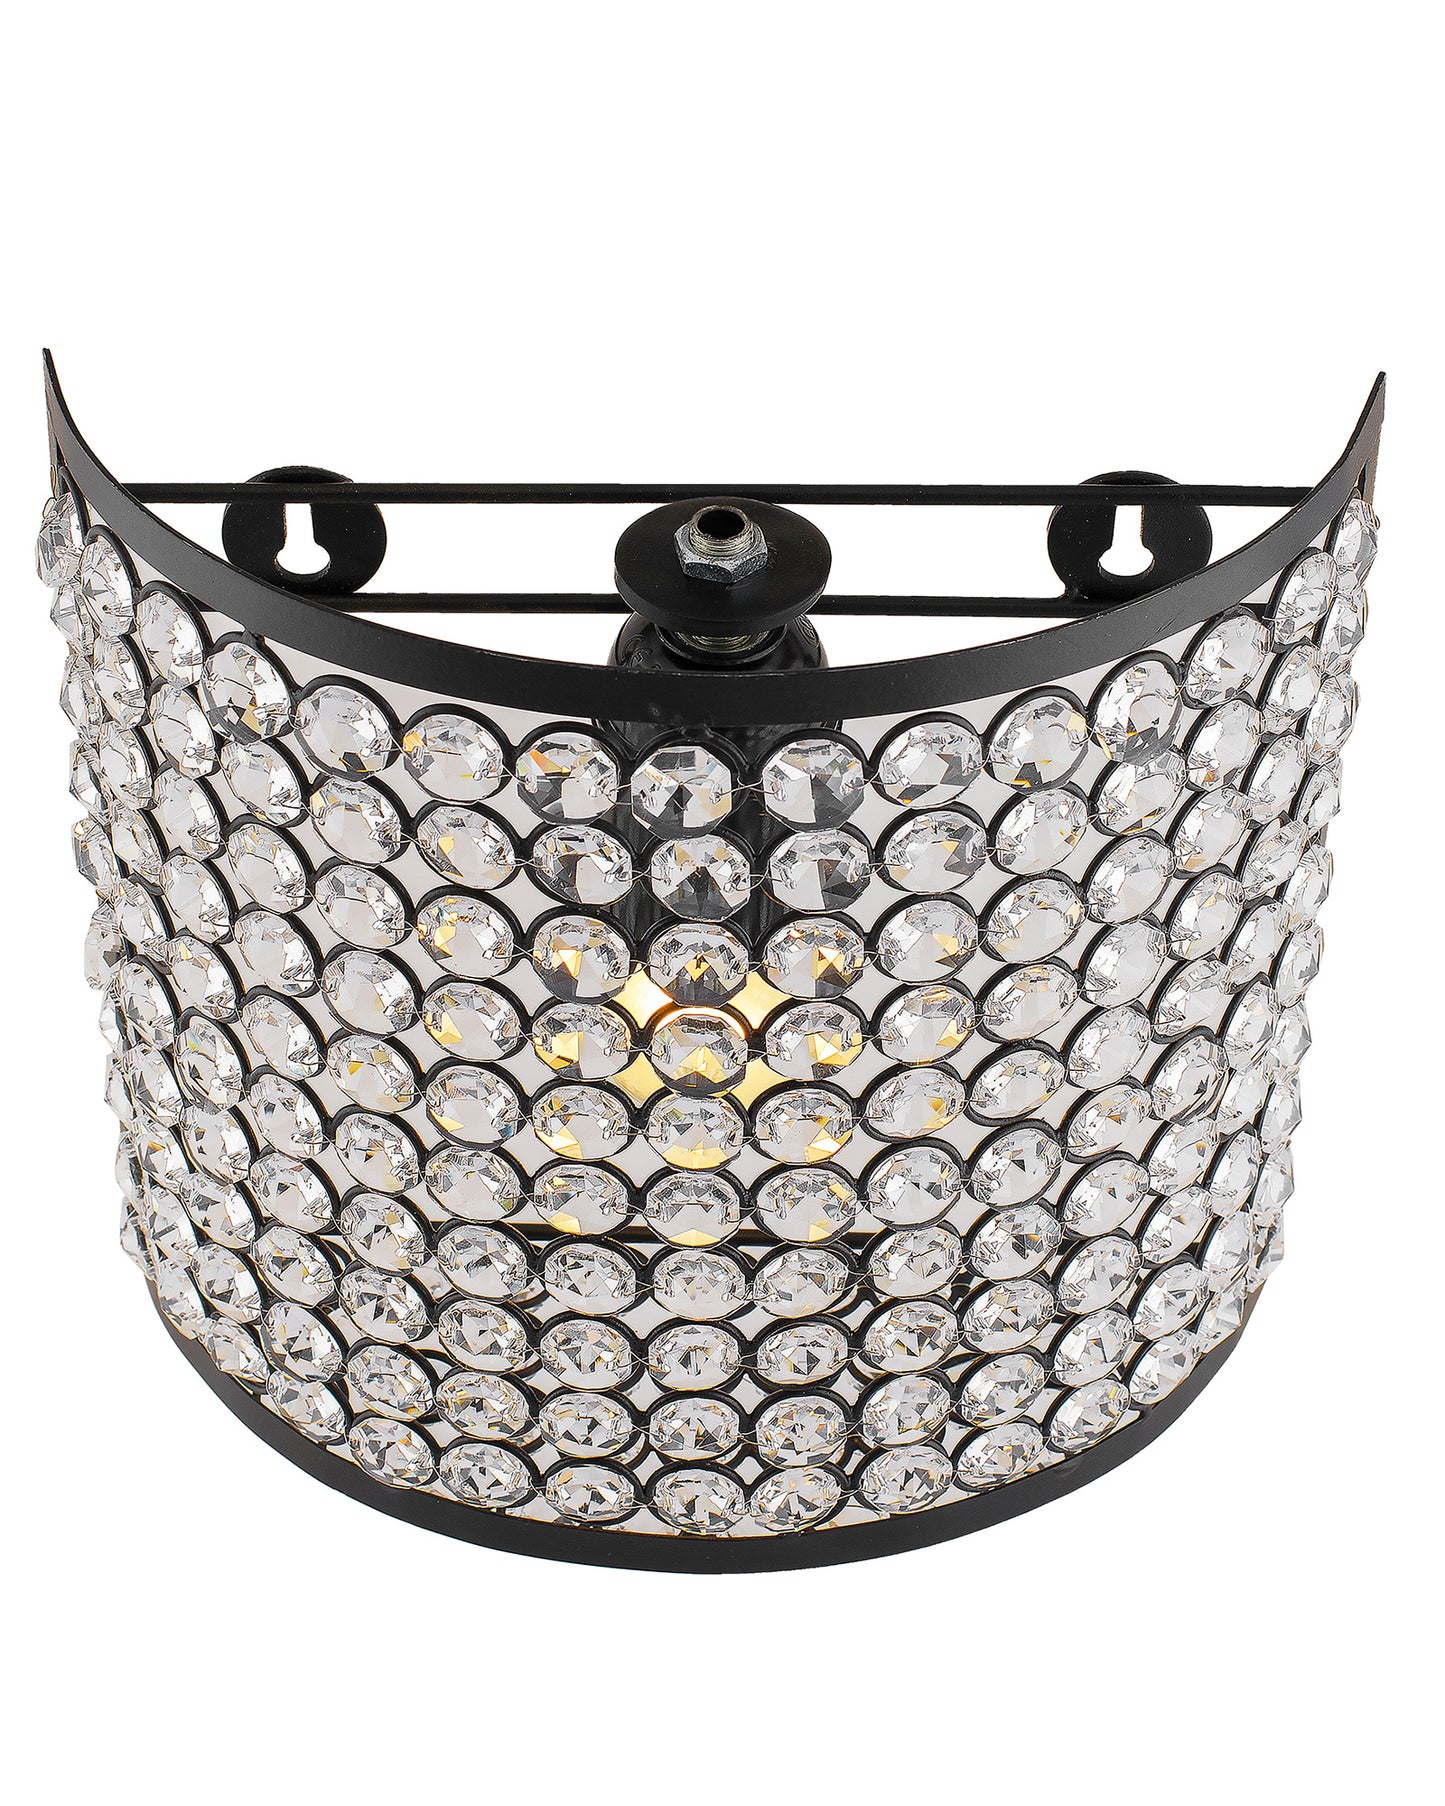 Crystal French Wall Sconce Lamp, Decorative Door Light, Matt Black and Crystal